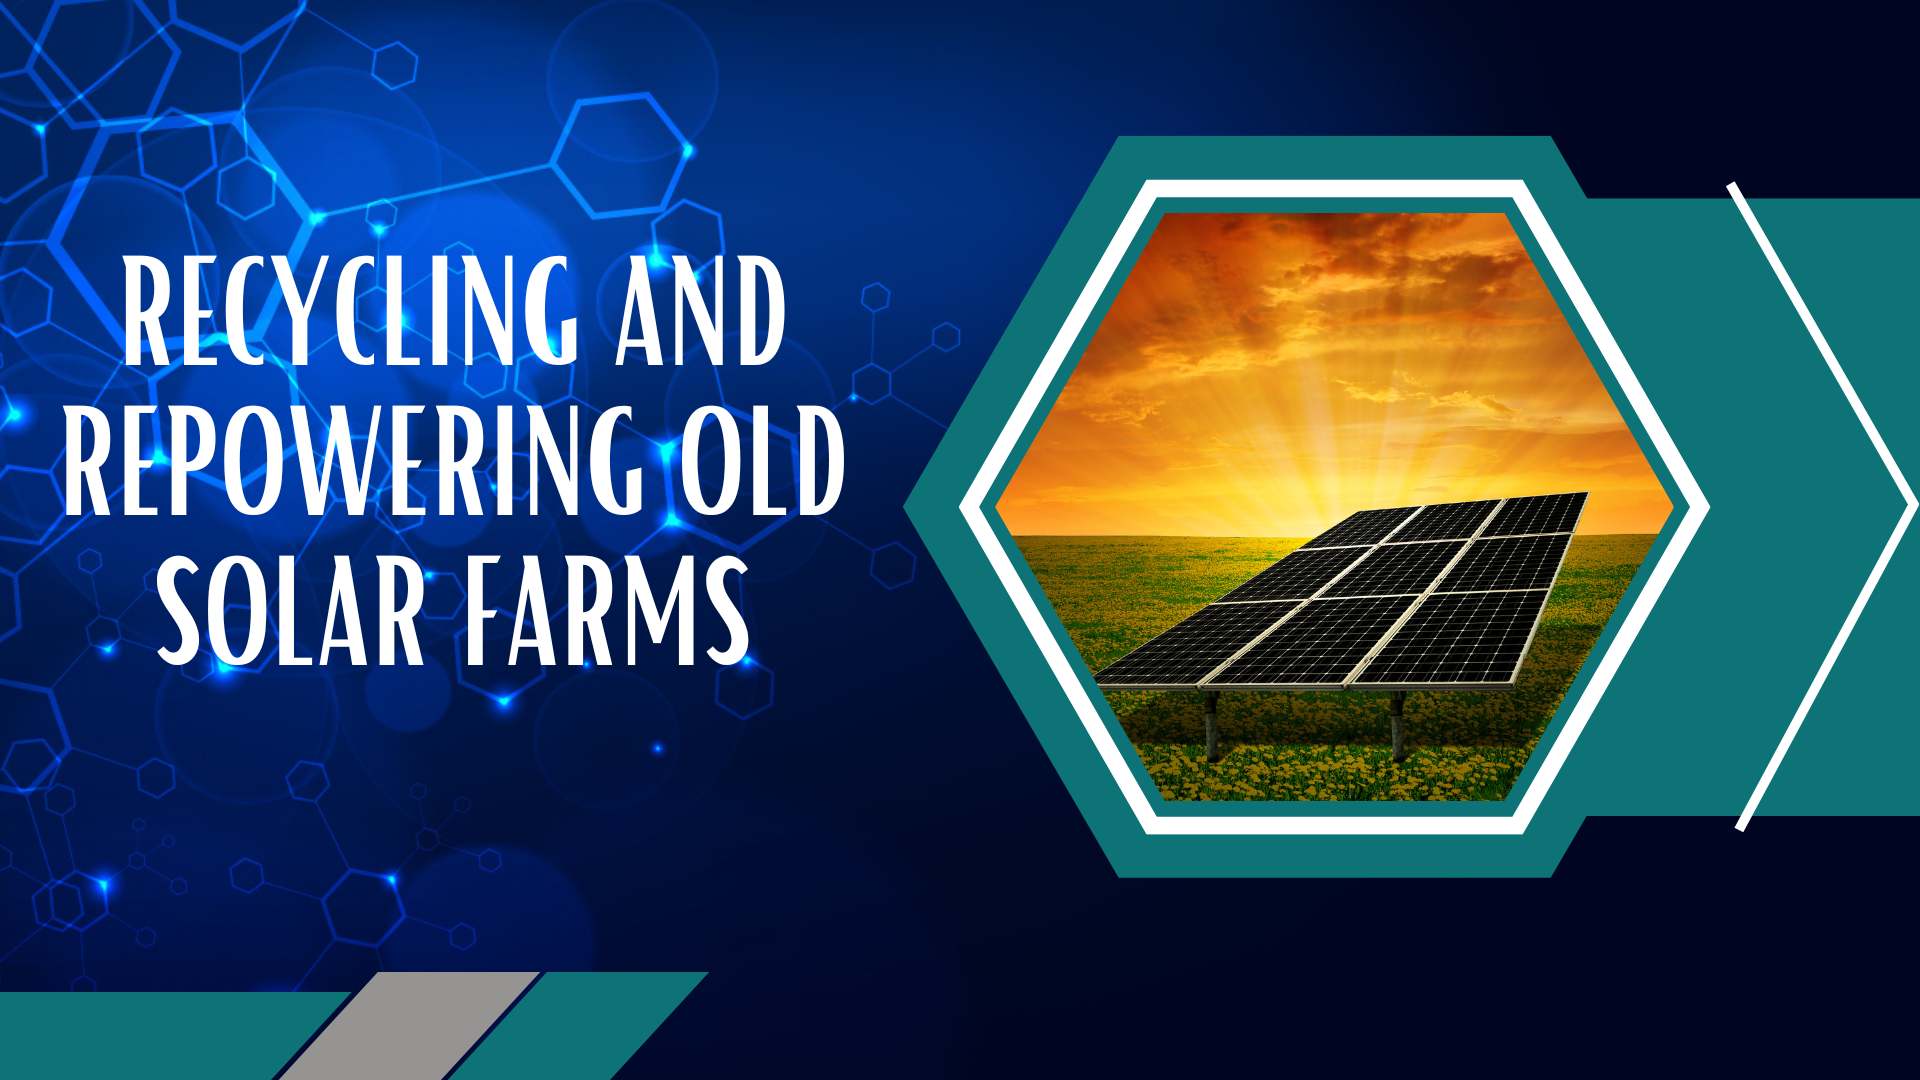 Recycling and Repowering Old Solar Farms